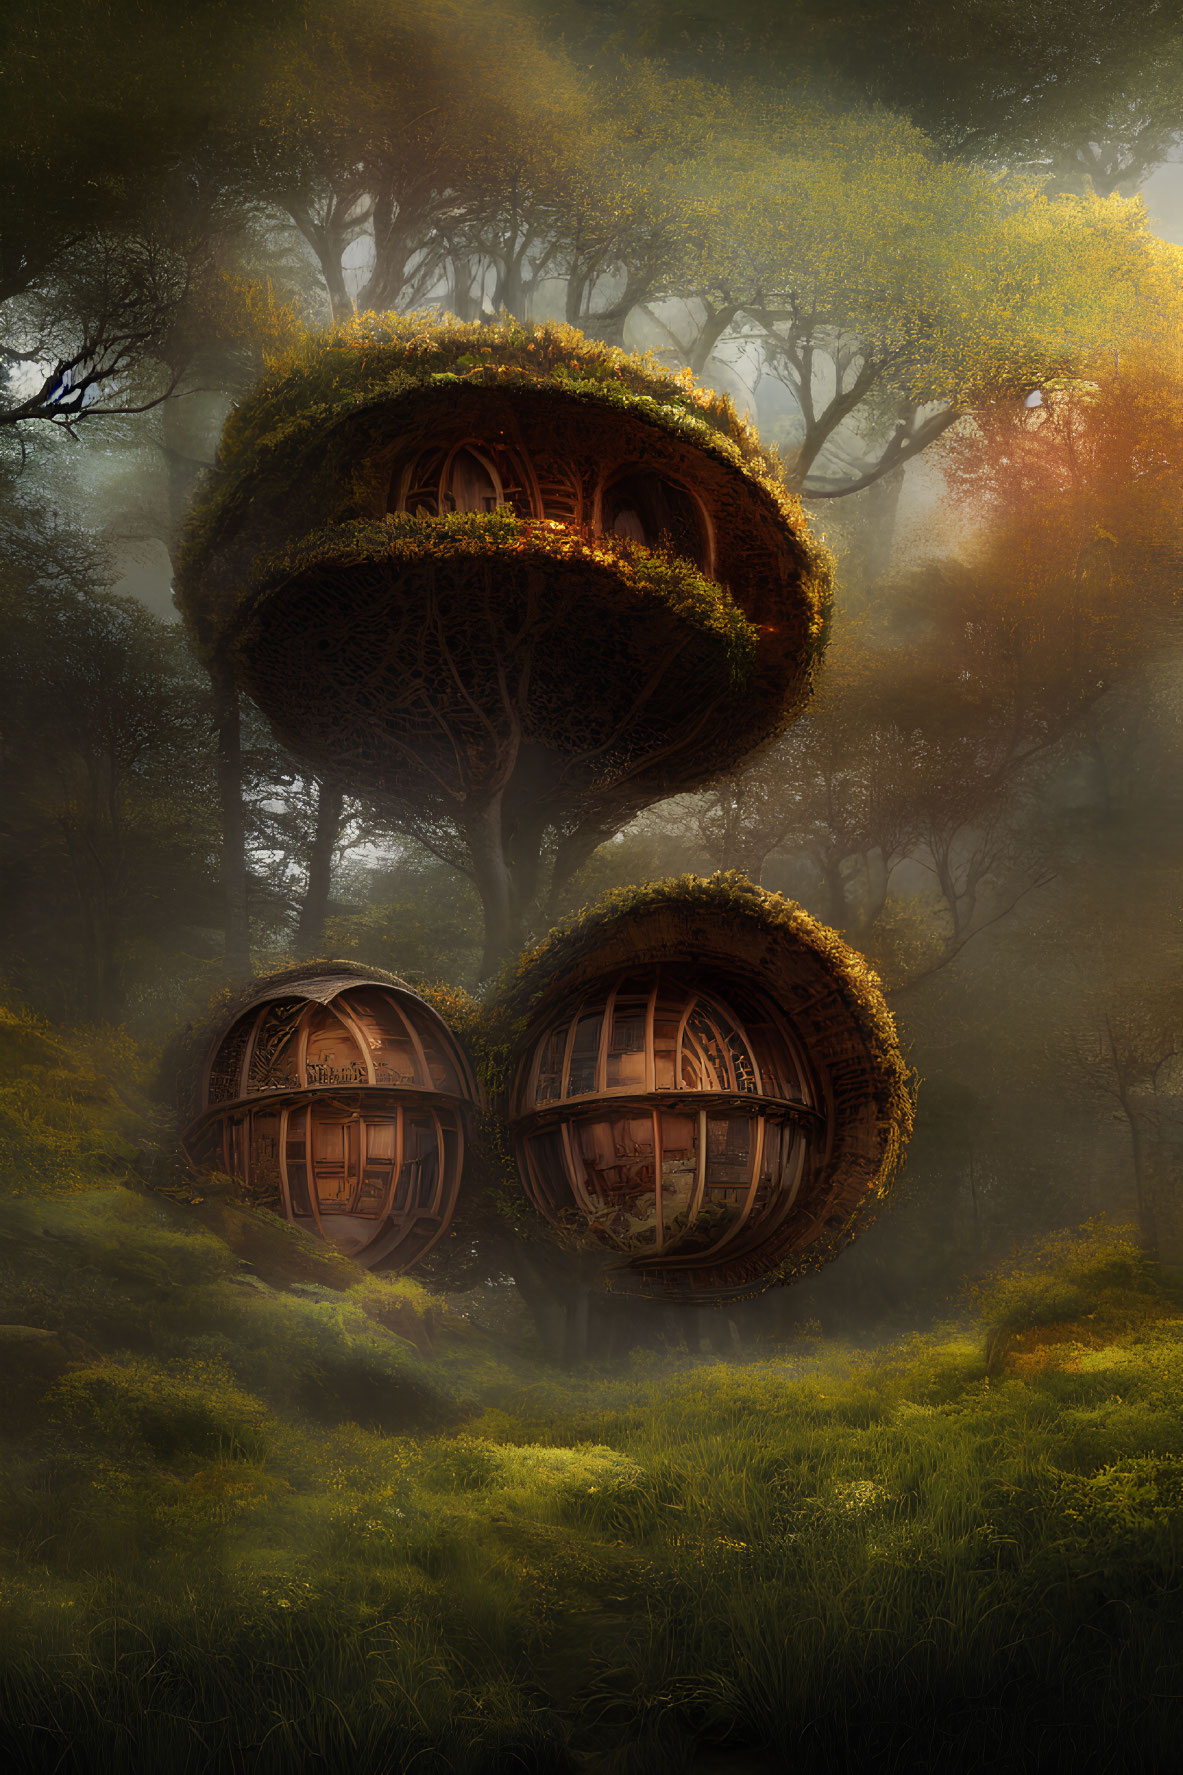 Magical spherical treehouses in misty woods with lush greenery